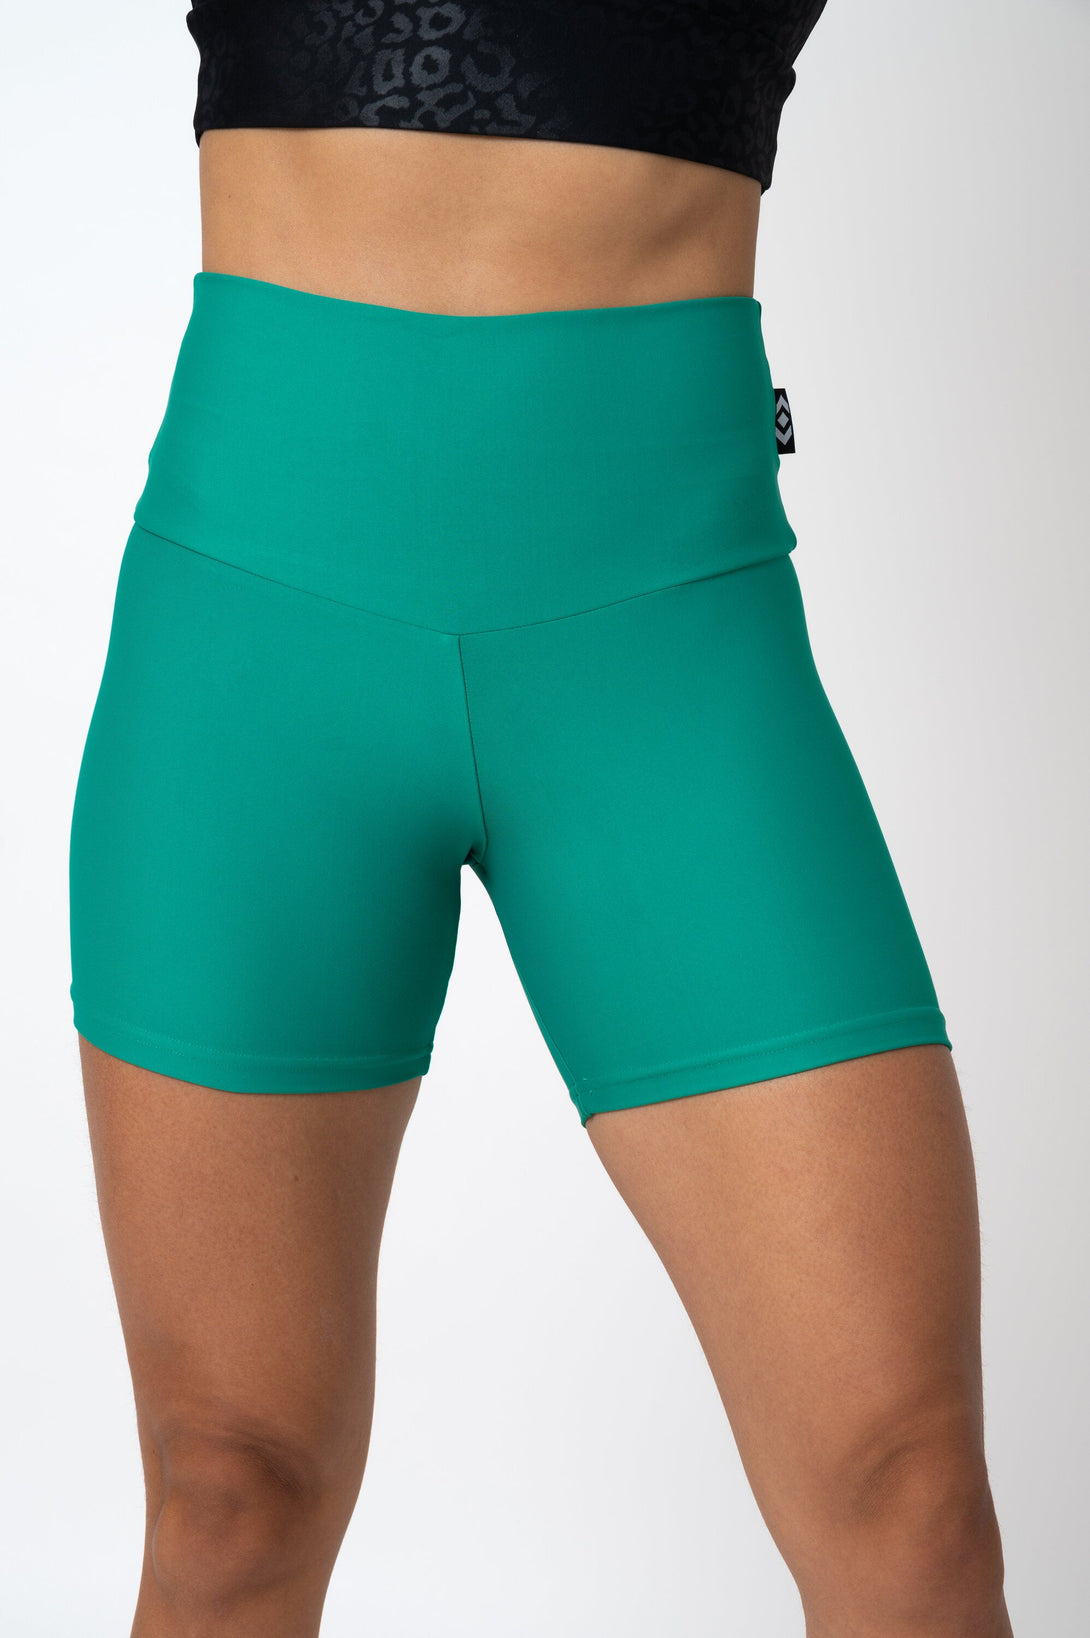 Seafoam Green Performance - High Waisted Booty Shorts-Activewear-Exoticathletica